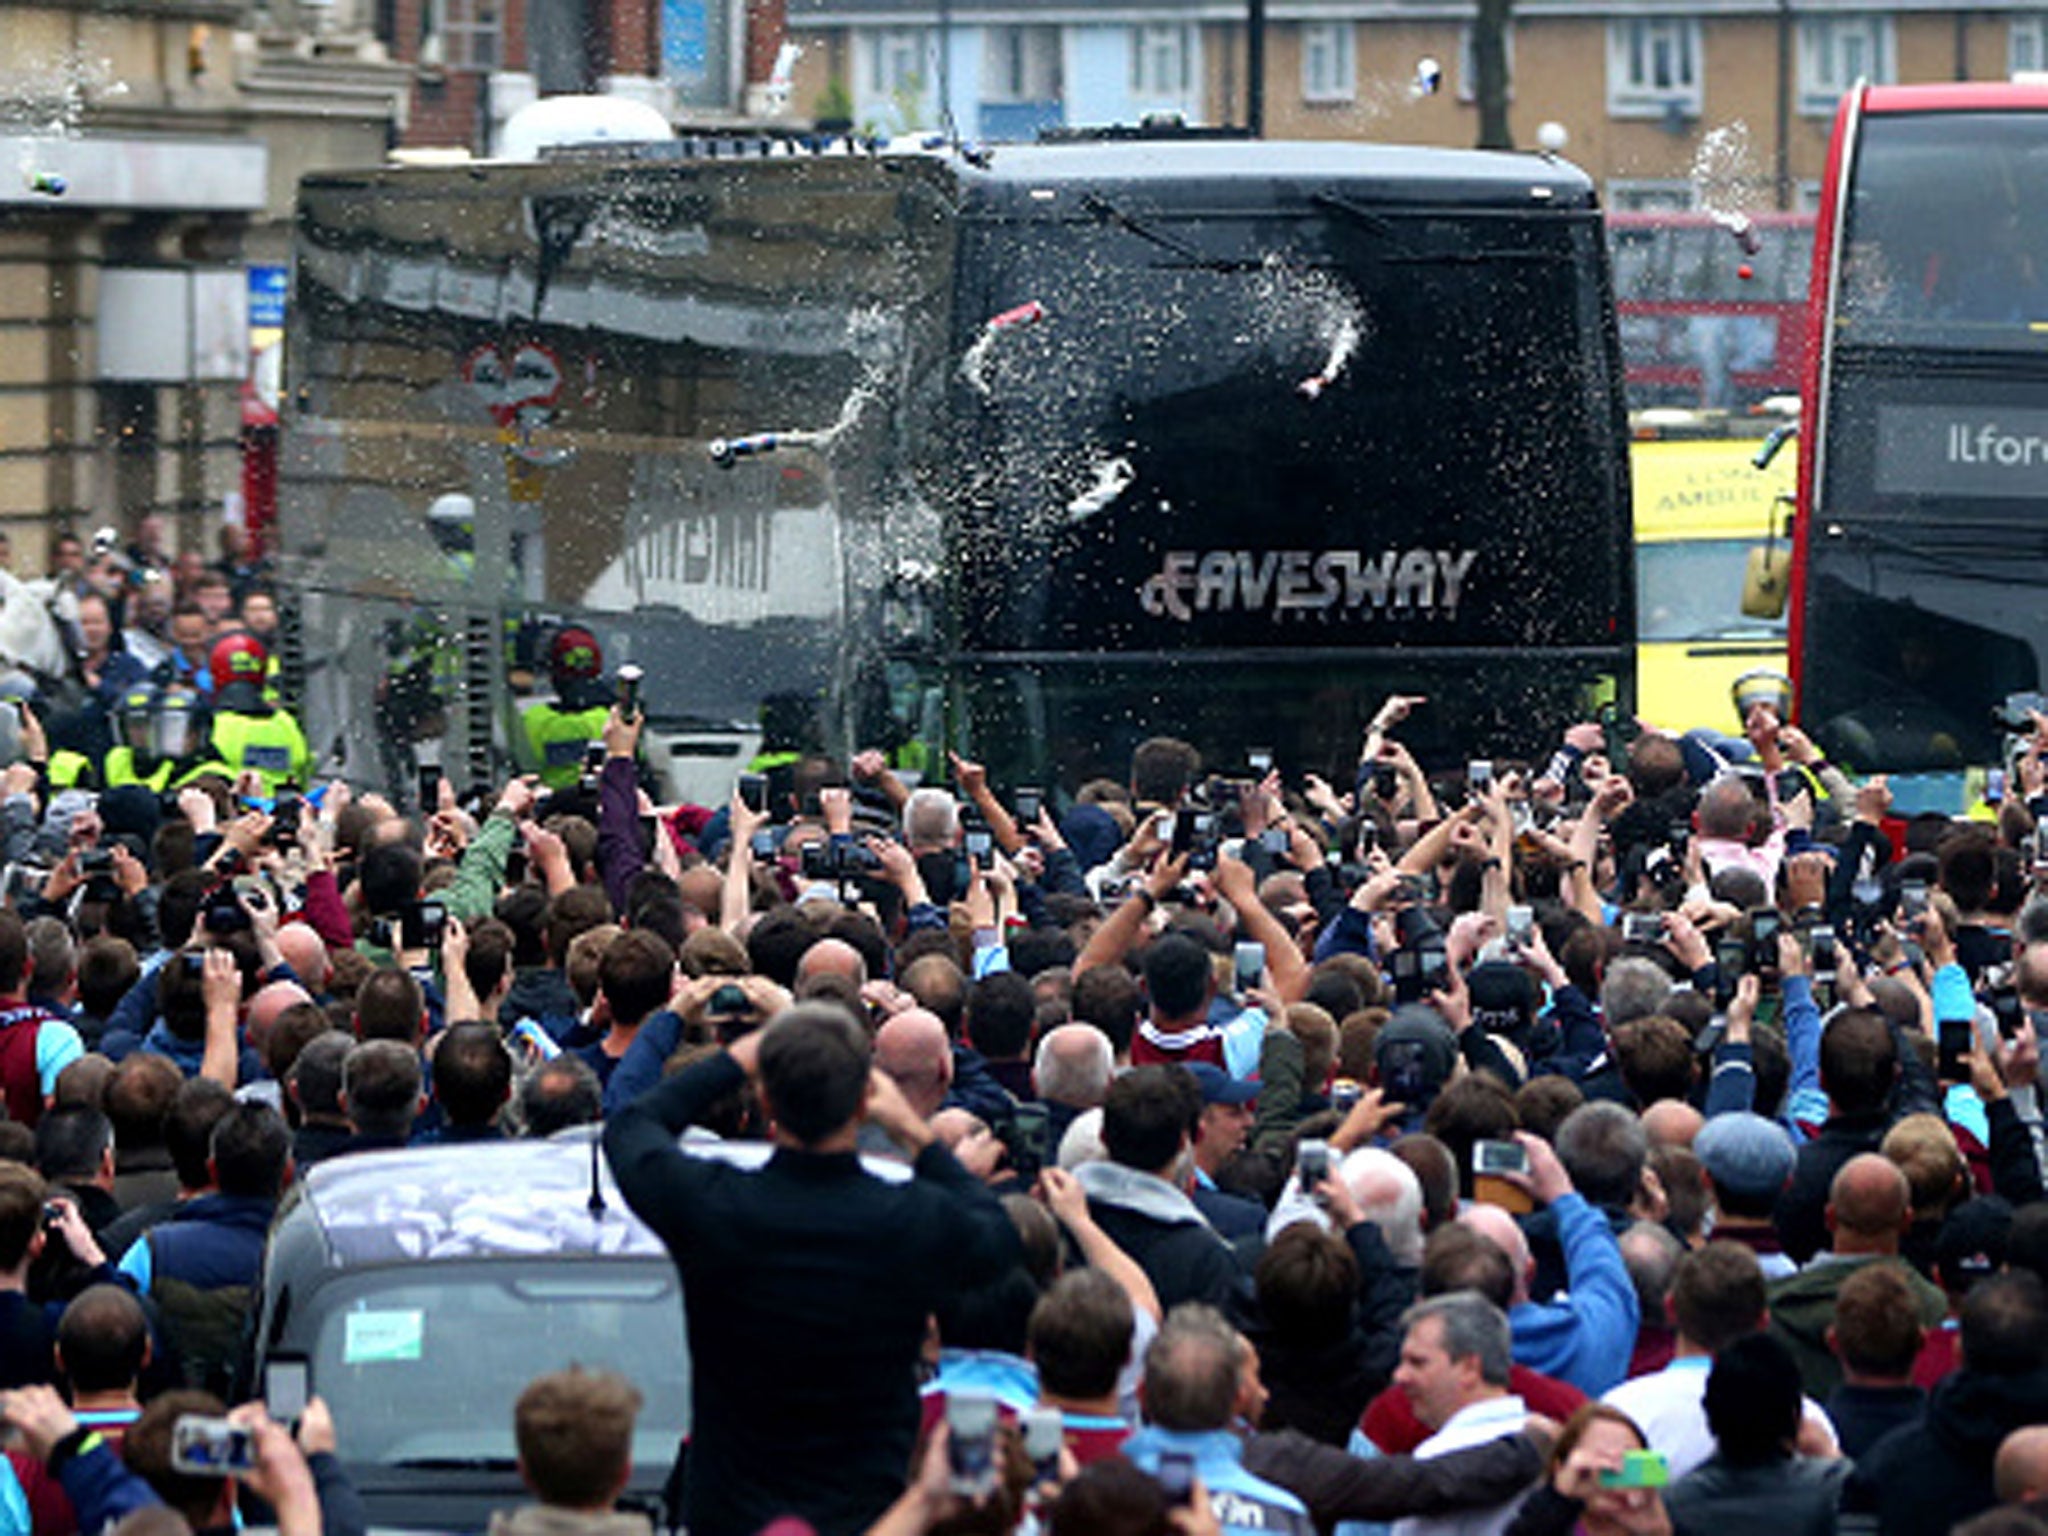 The Manchester United team coach comes under attack from home supporters outside Upton Park on Tuesday night